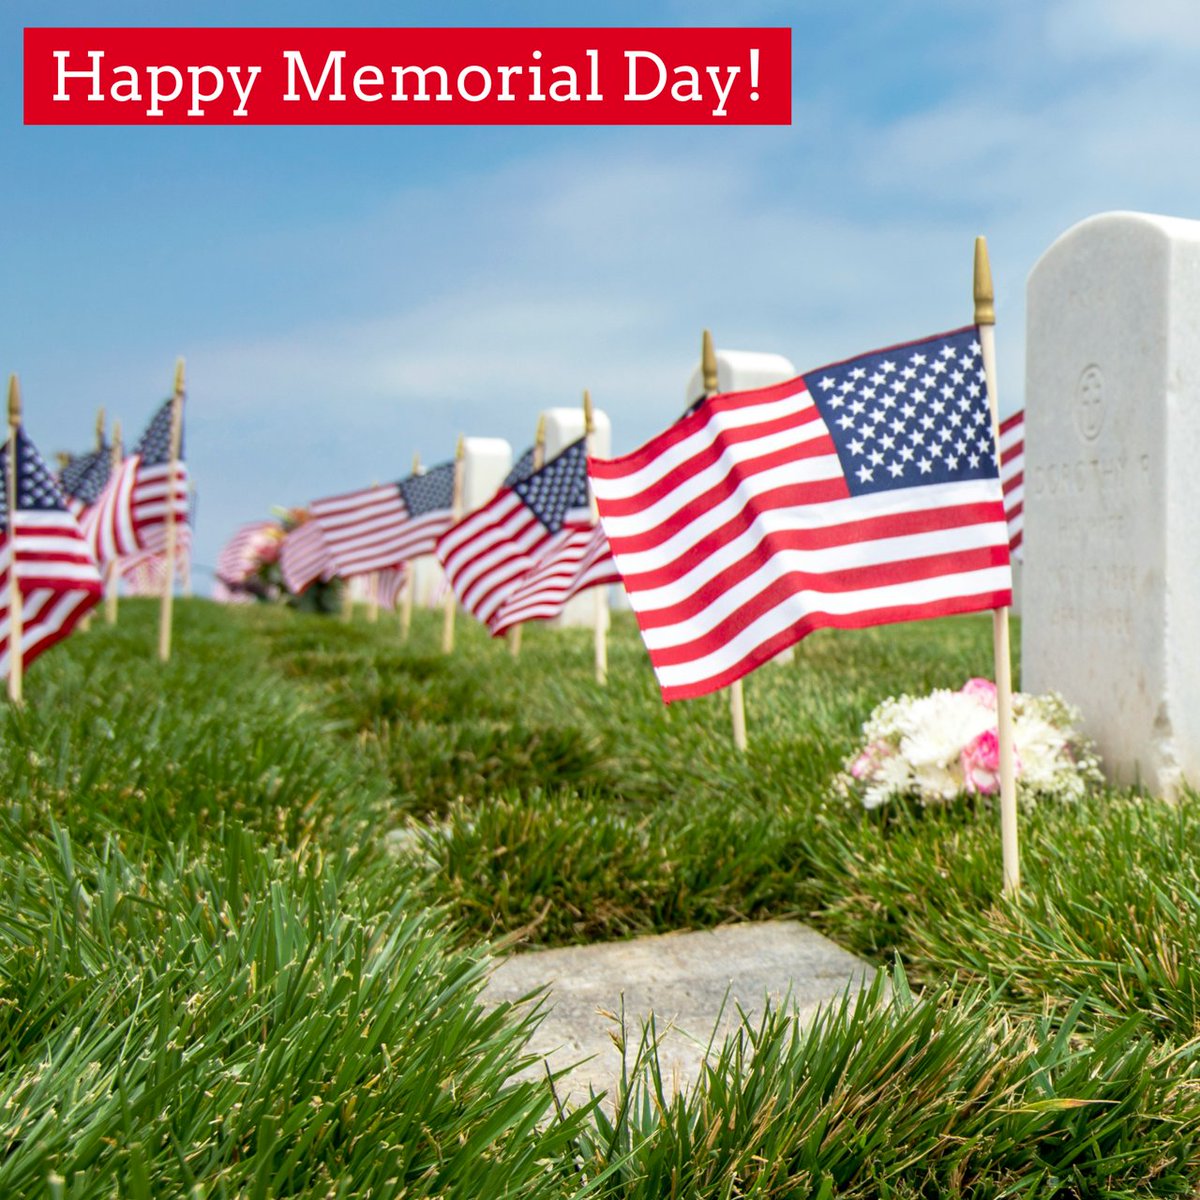 Happy Memorial Day from Halford Busby!